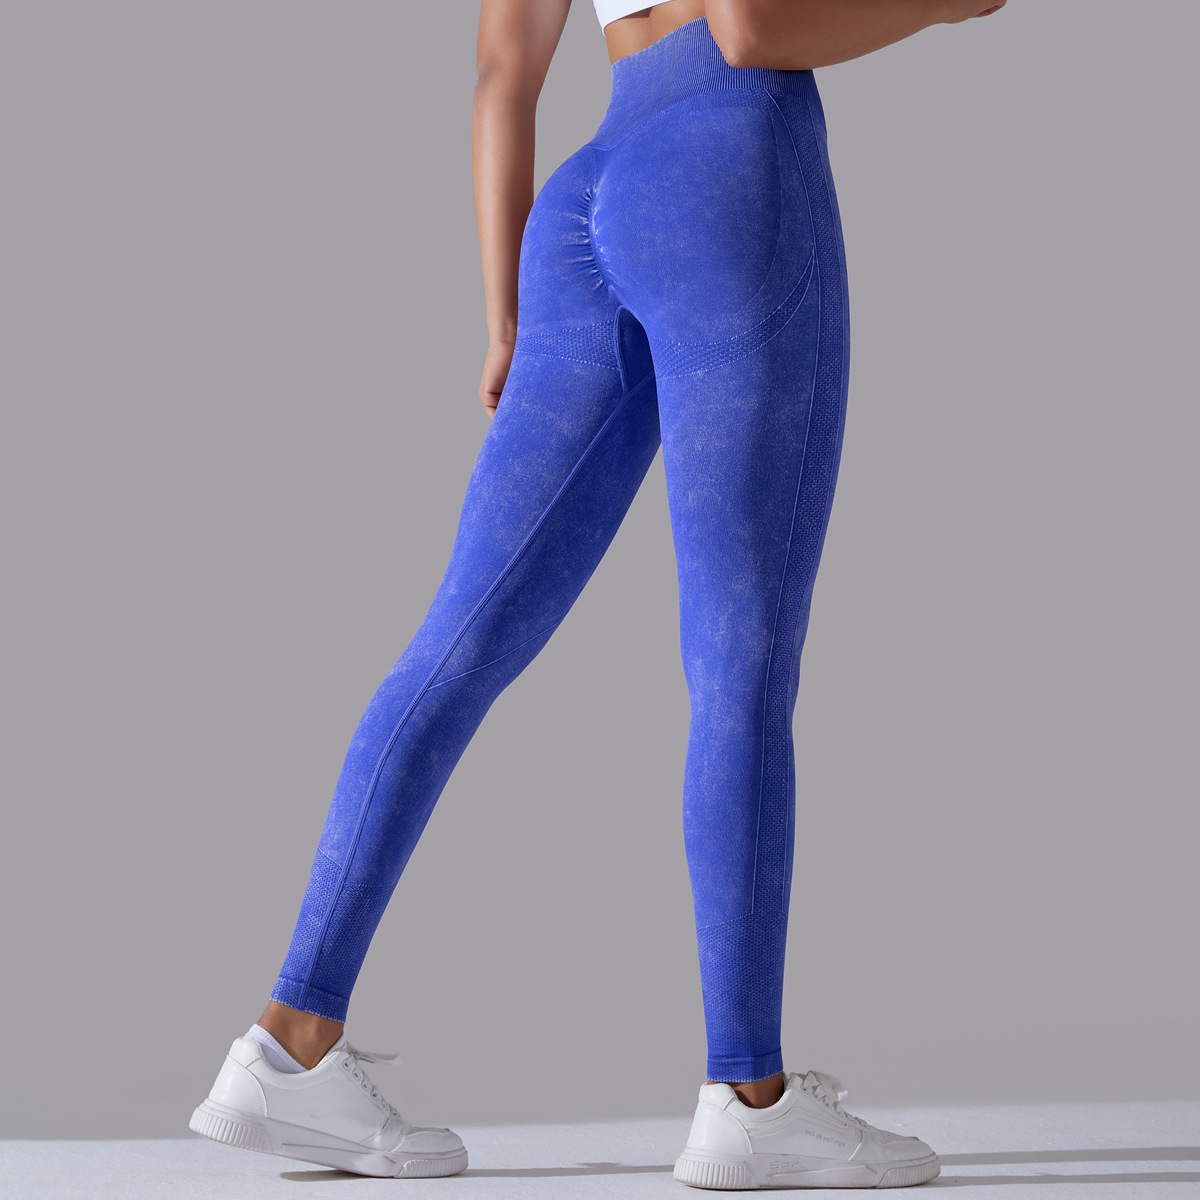 gym pants supplier